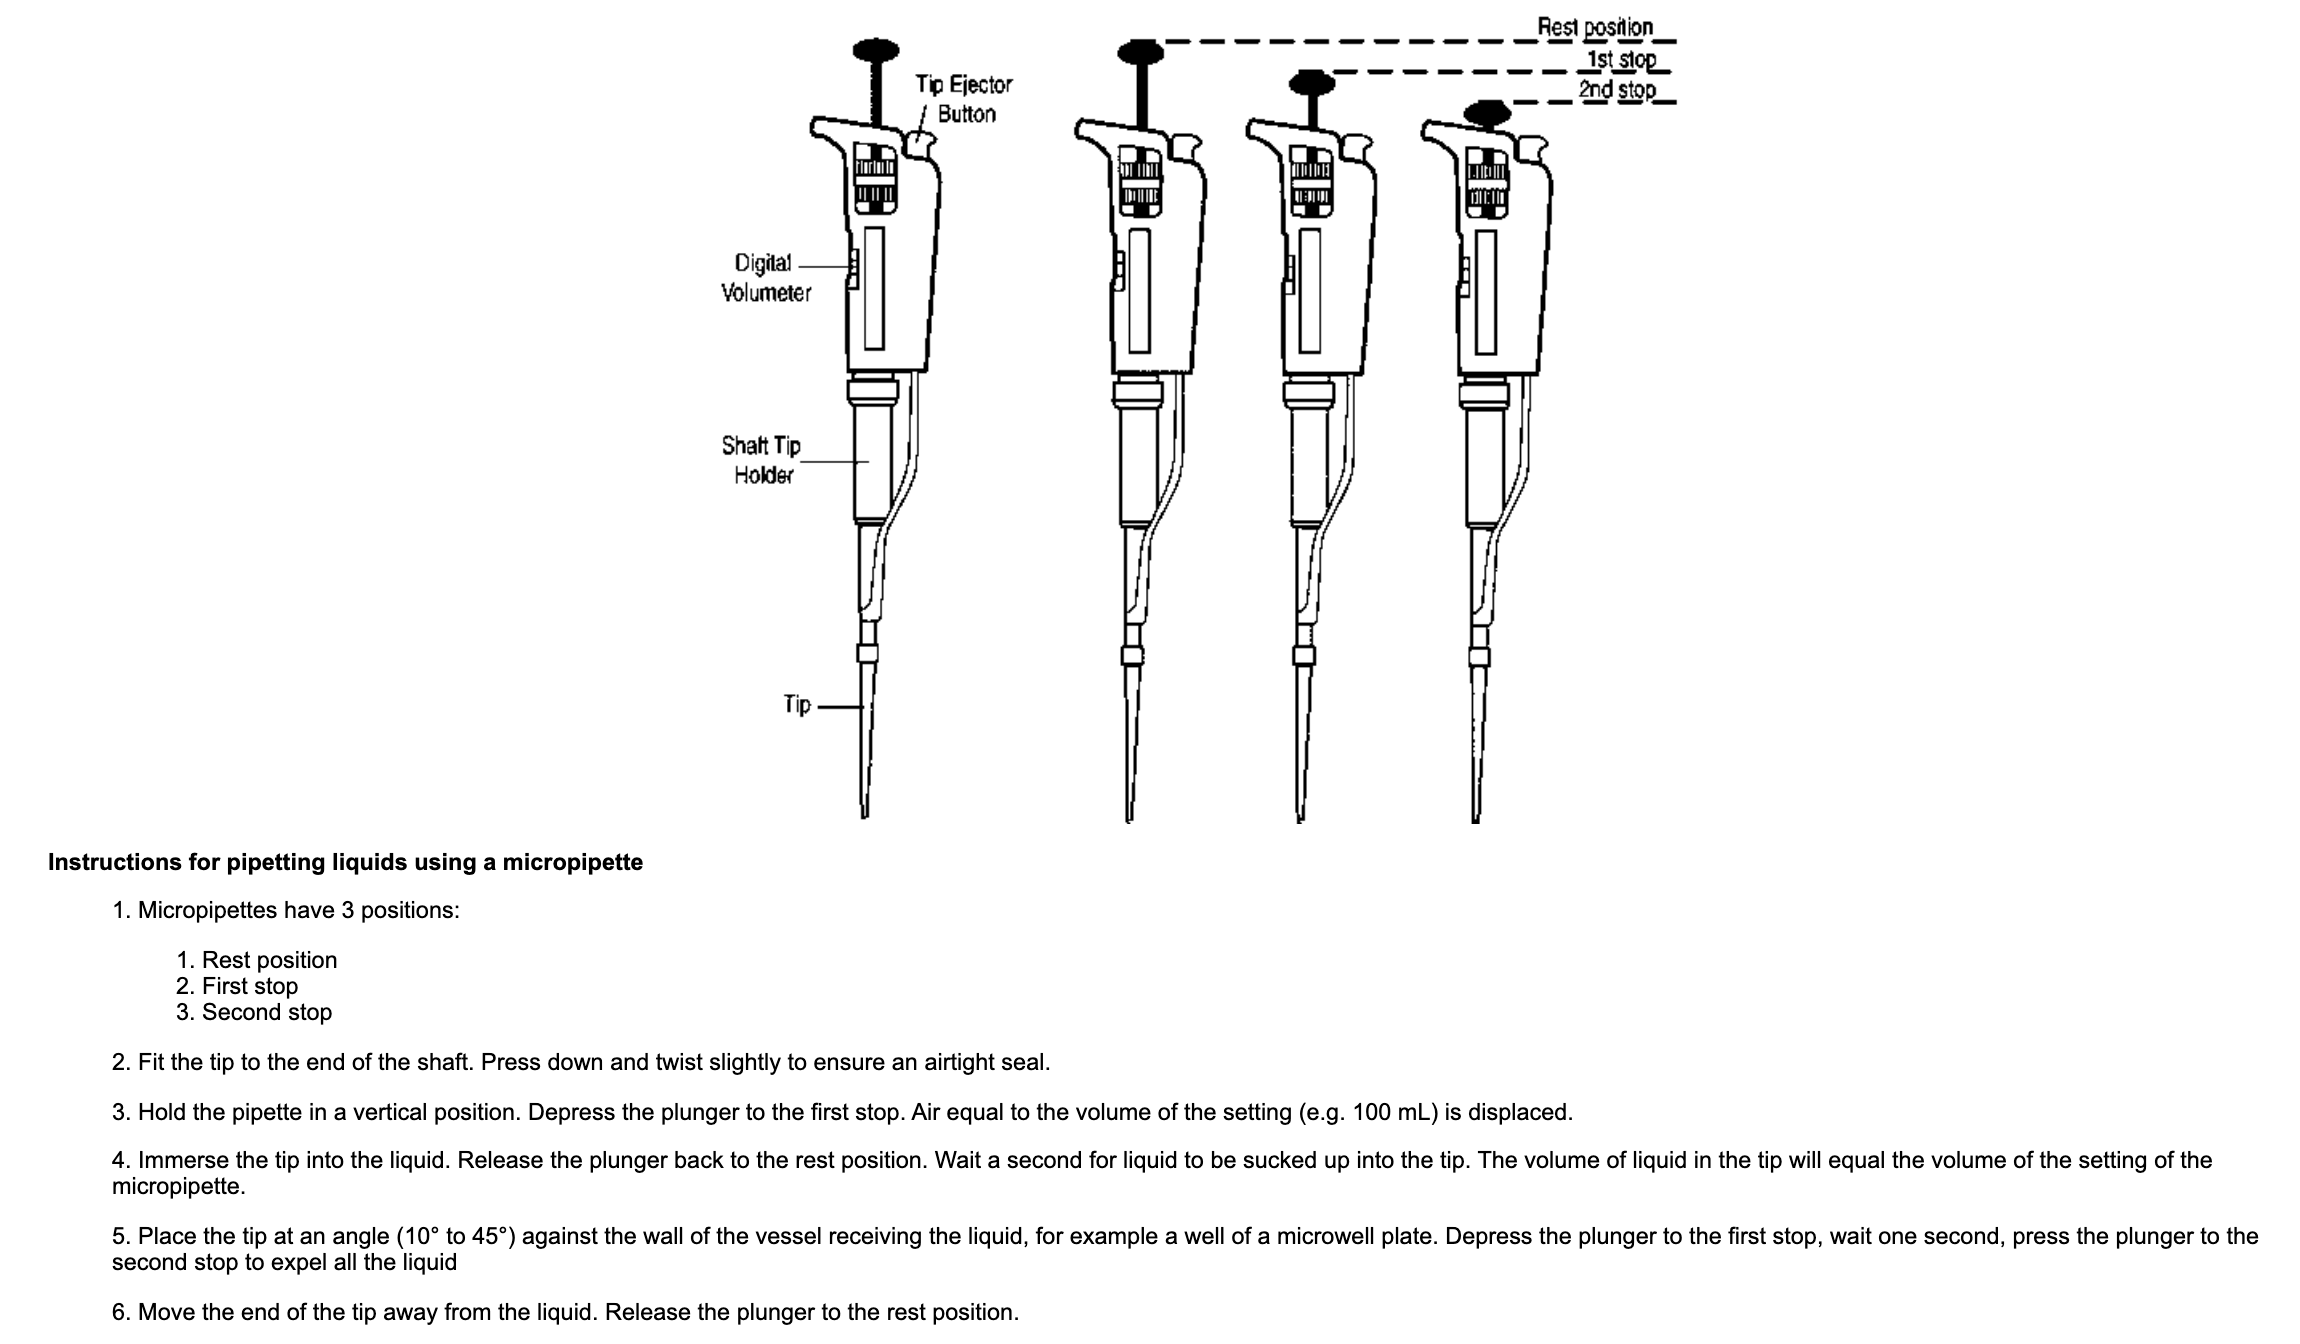 Instructions on how to use a micropipette. [Click here for source](http://www.fao.org/3/ac802e/ac802e05.htm)